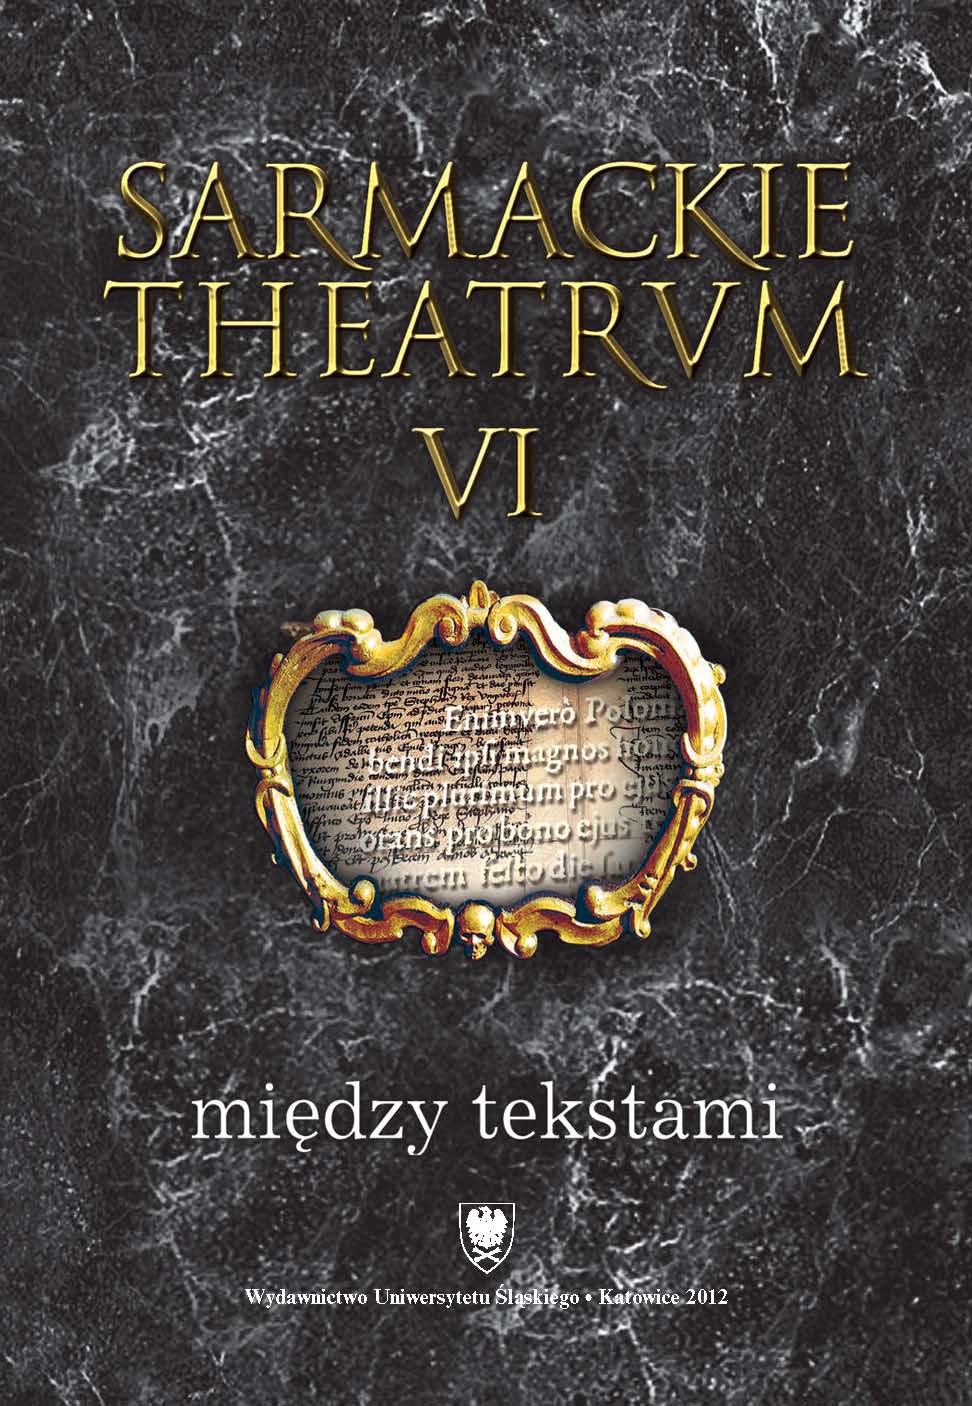 In relation to a literary tradition Stanisław Tarnowski’s report from the Kingdom of Prussia Cover Image